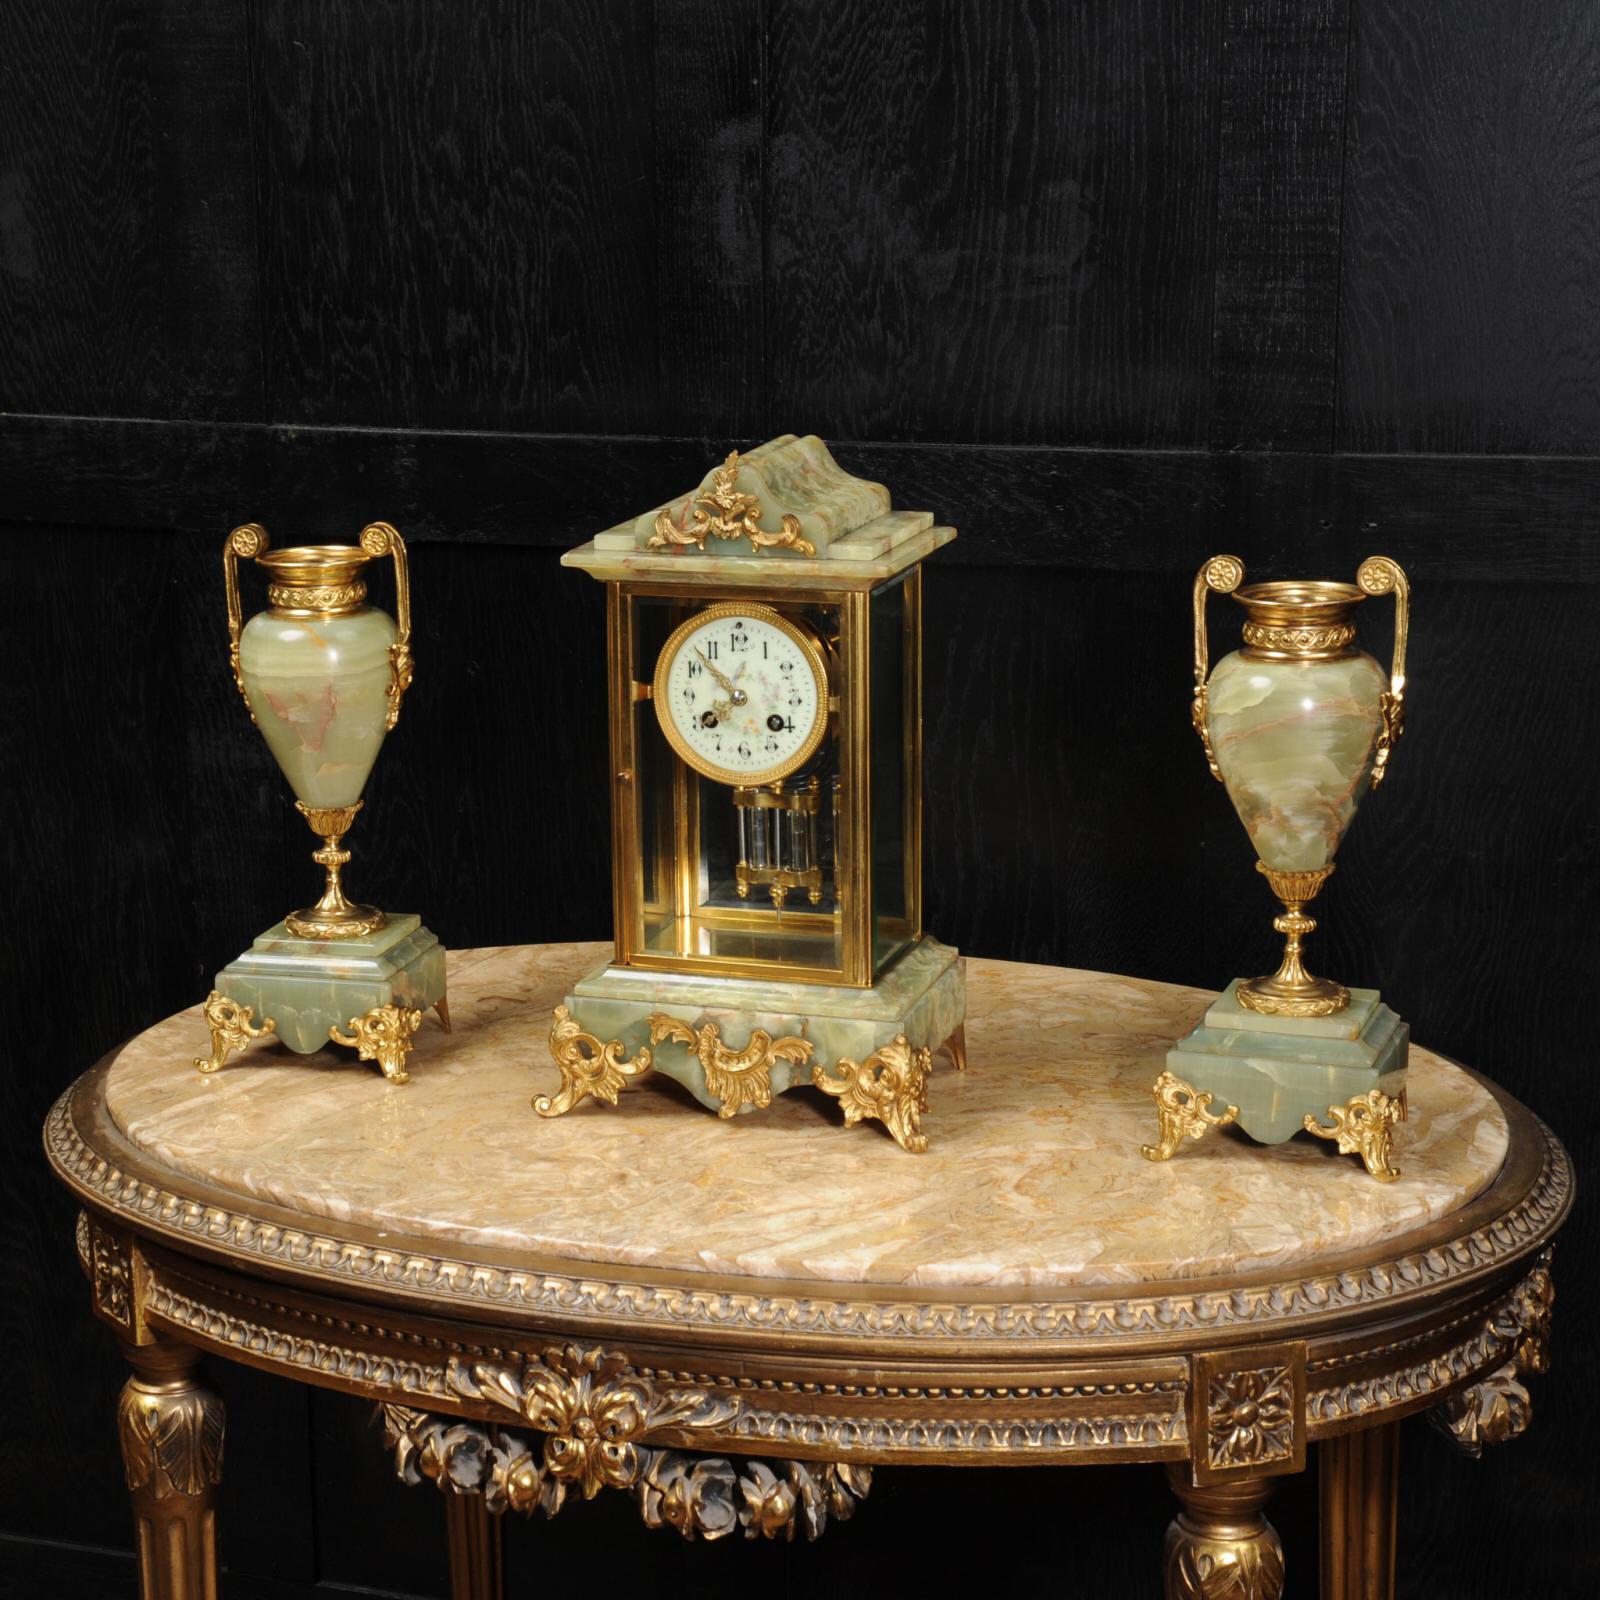 A superb and chic antique French four glass regulator. It features a mercury compensated pendulum gently swinging behind the bevelled glass. The case is constructed of beautifully variegated onyx, mounted with ormolu and is classical in design. The